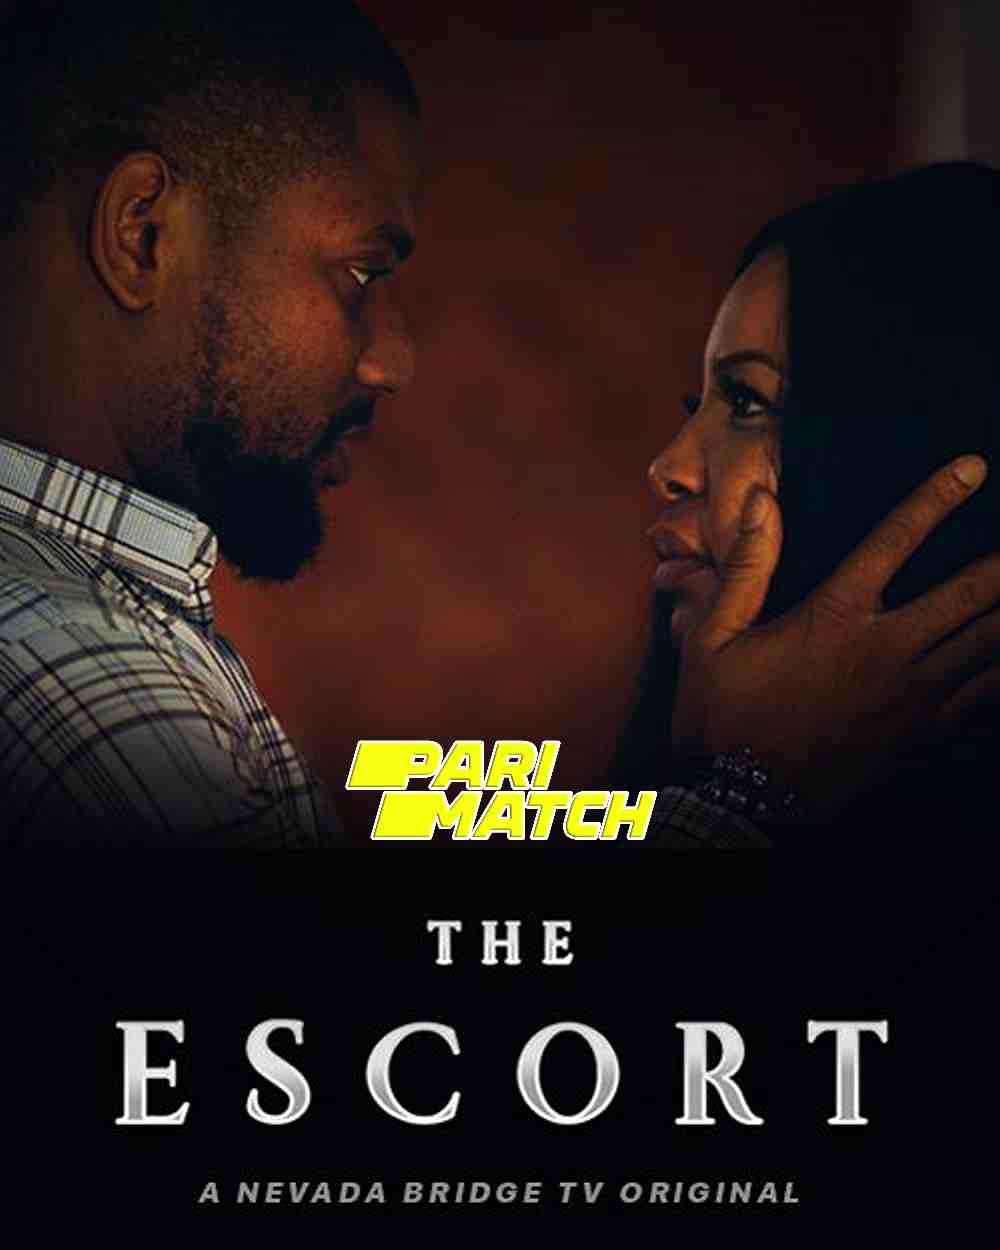 The Escort (2021) Unofficial Hindi Dubbed